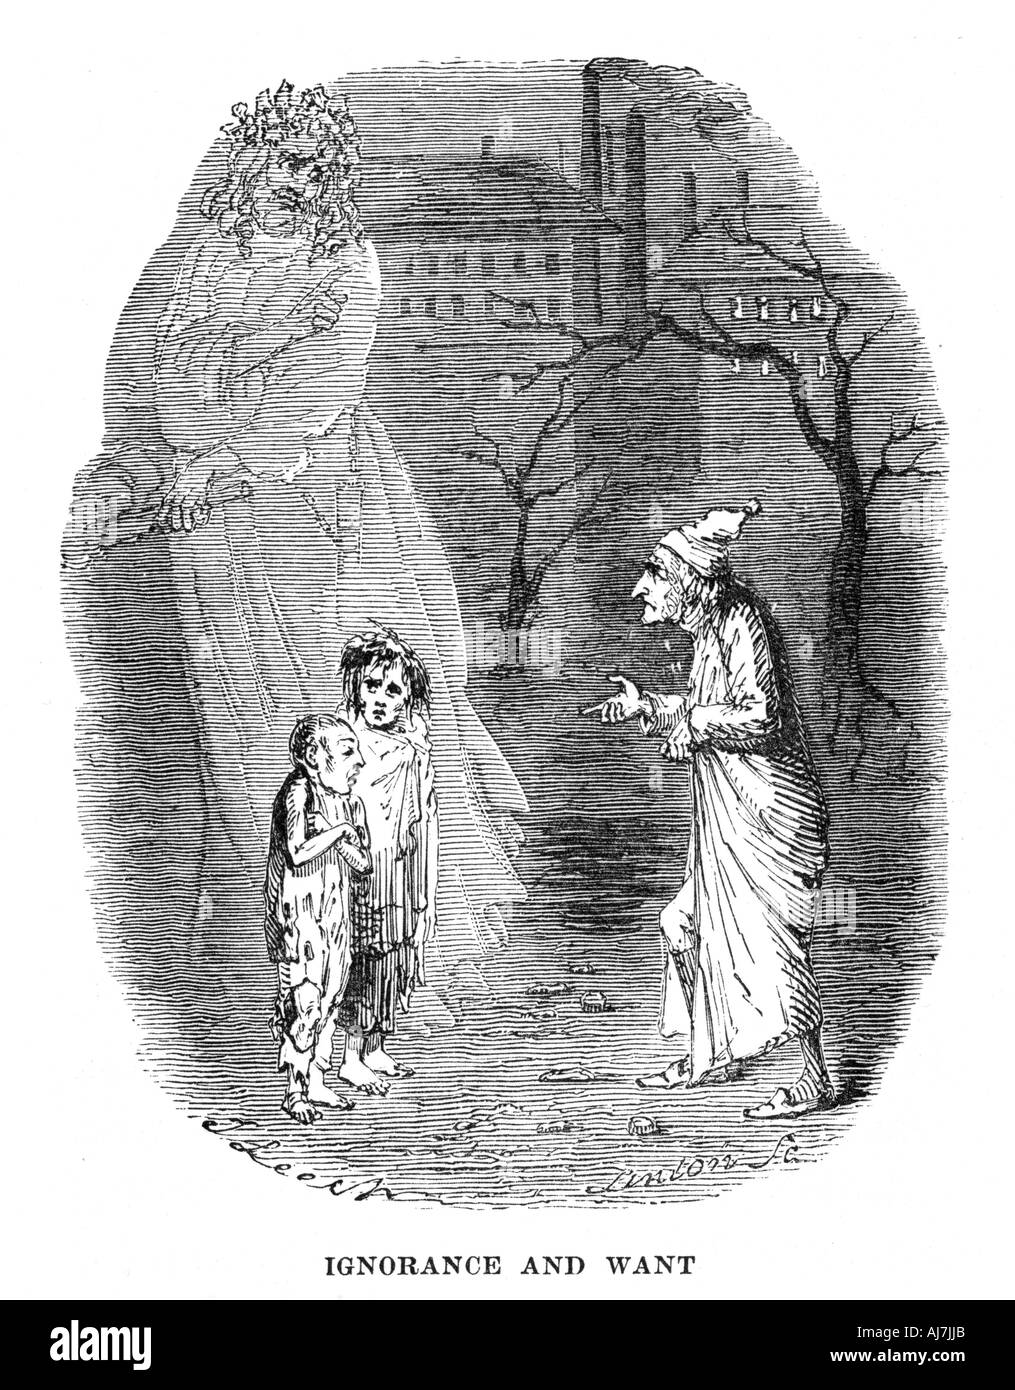 Scene from A Christmas Carol by Charles Dickens 1843 Stock Photo: 8370346 - Alamy